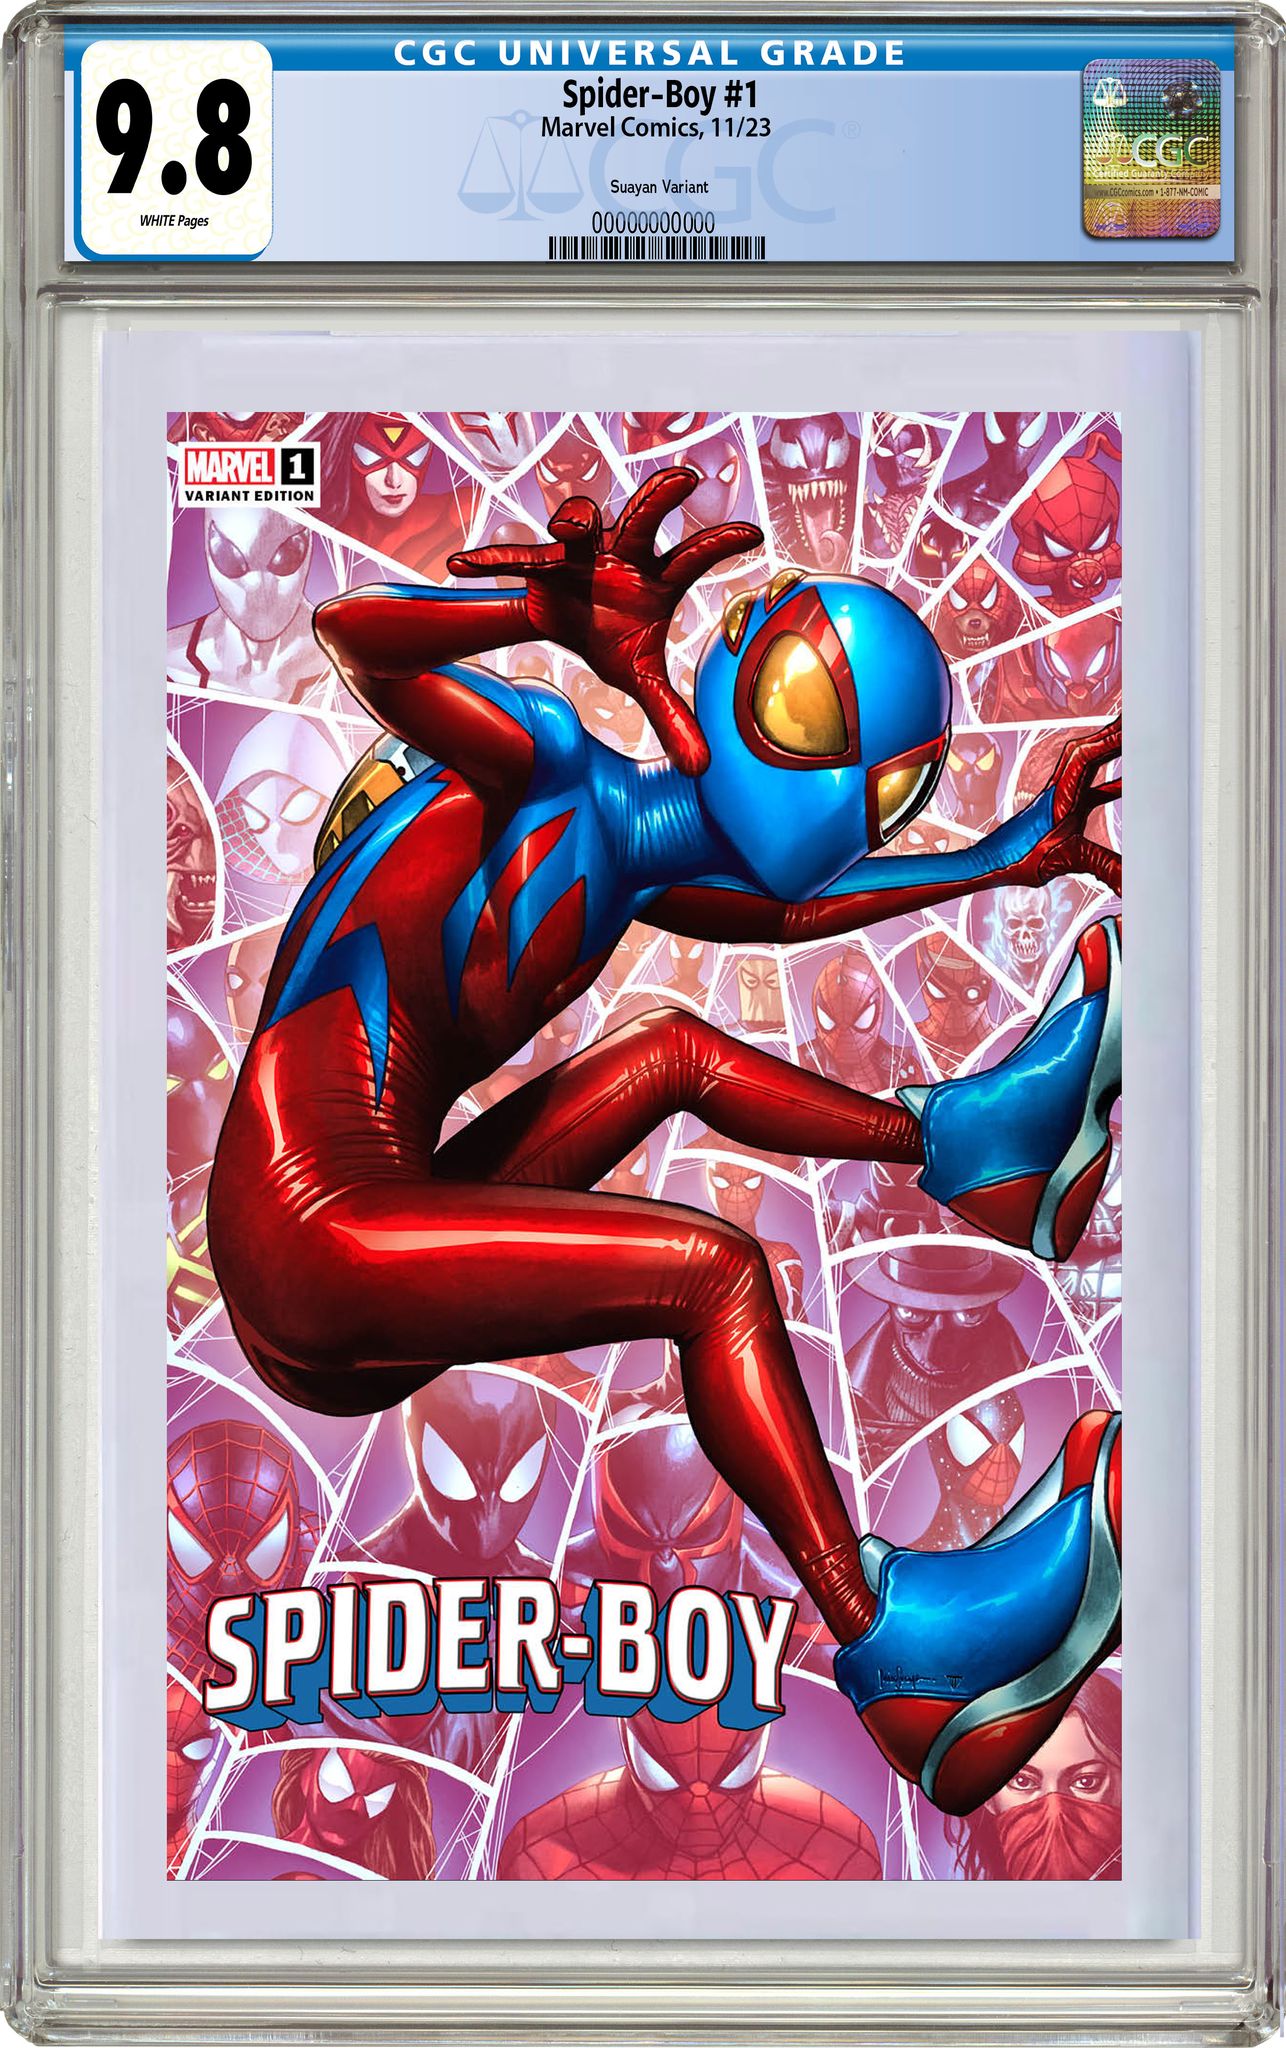 SPIDER-BOY #1 MICO SUAYAN EXCLUSIVE VARIANT COVER OPTIONS - 11/01/23